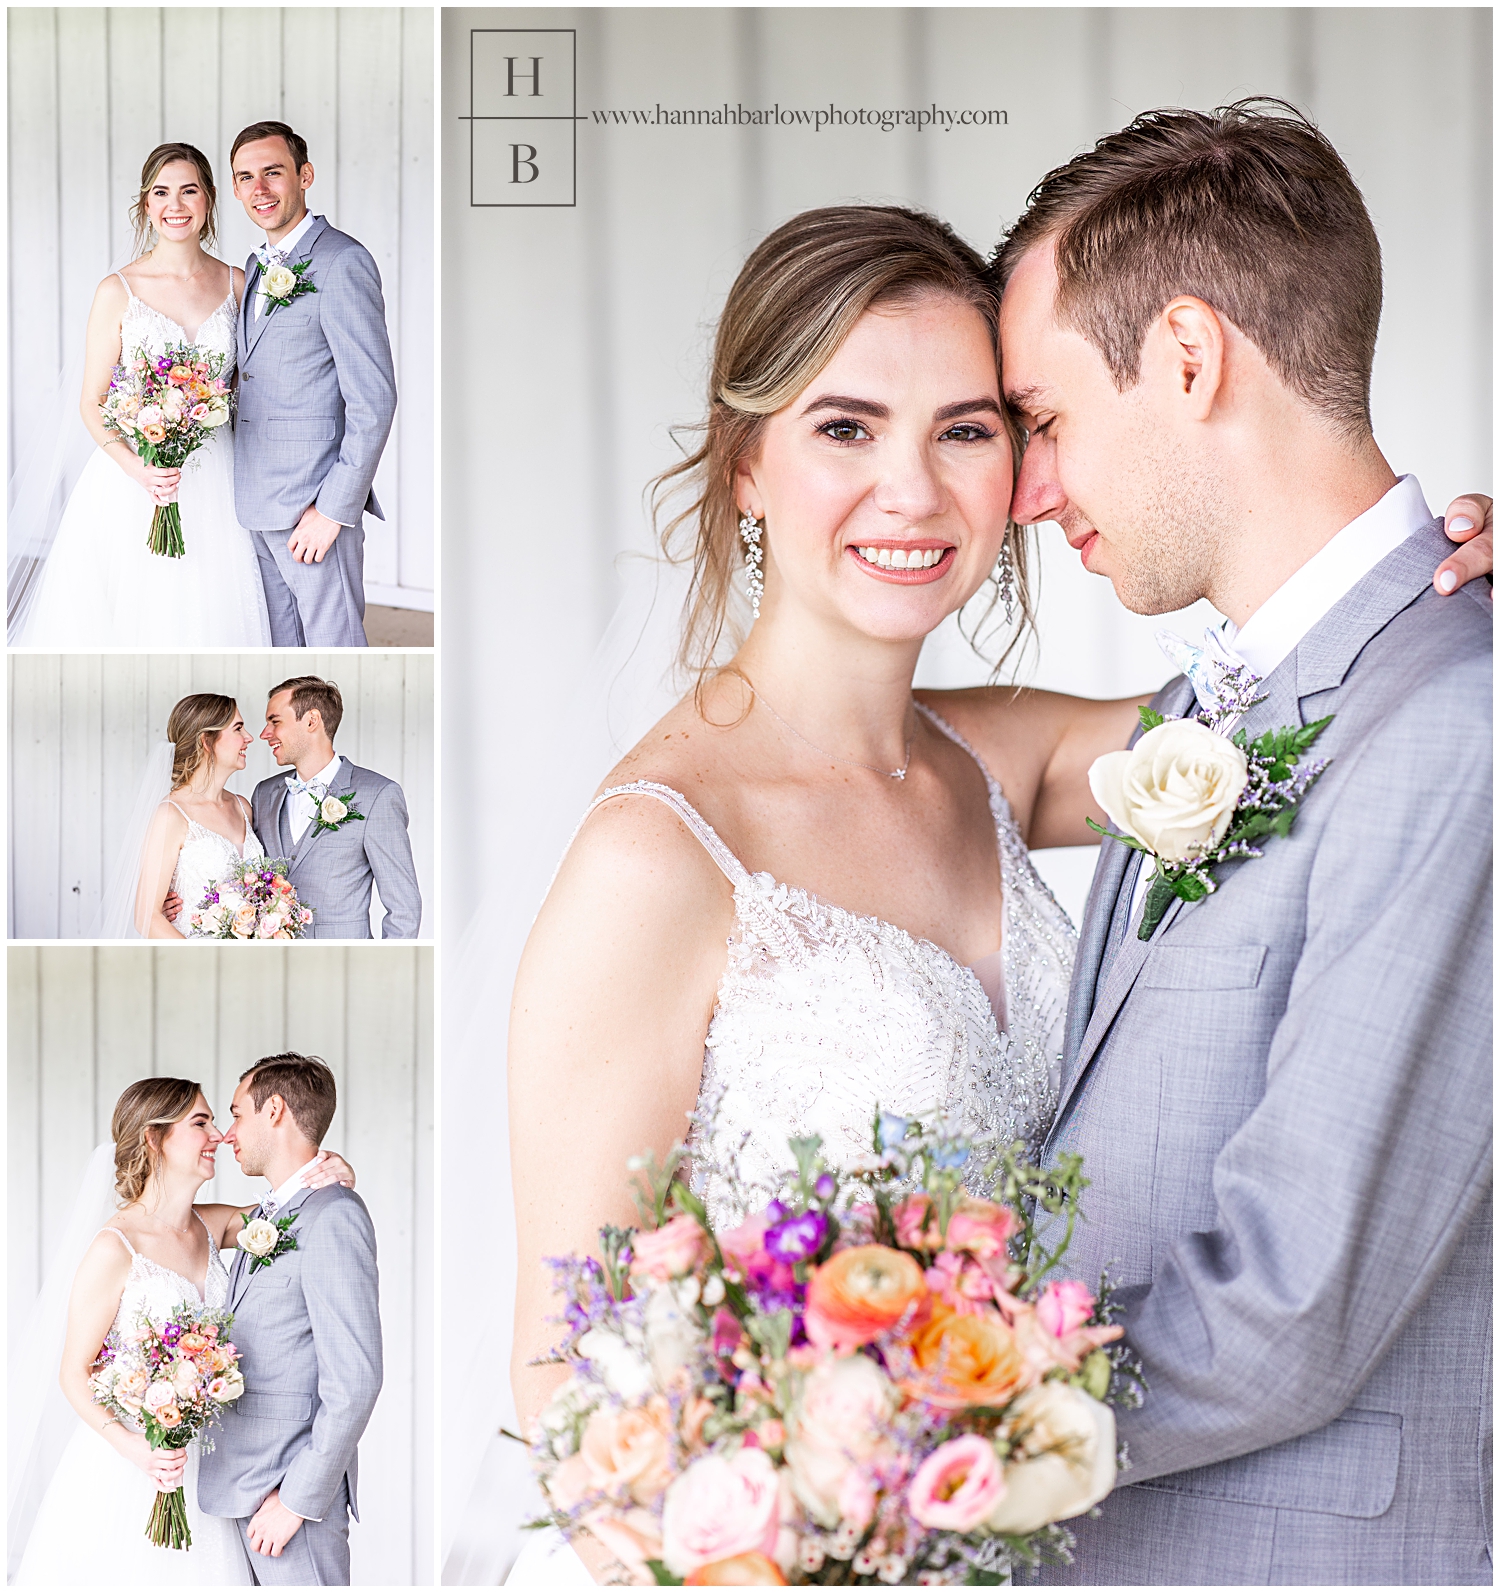 Bride and groom wedding portraits with groom wearing grey tux and bride in white gown holding a mix of spring colored flowers.